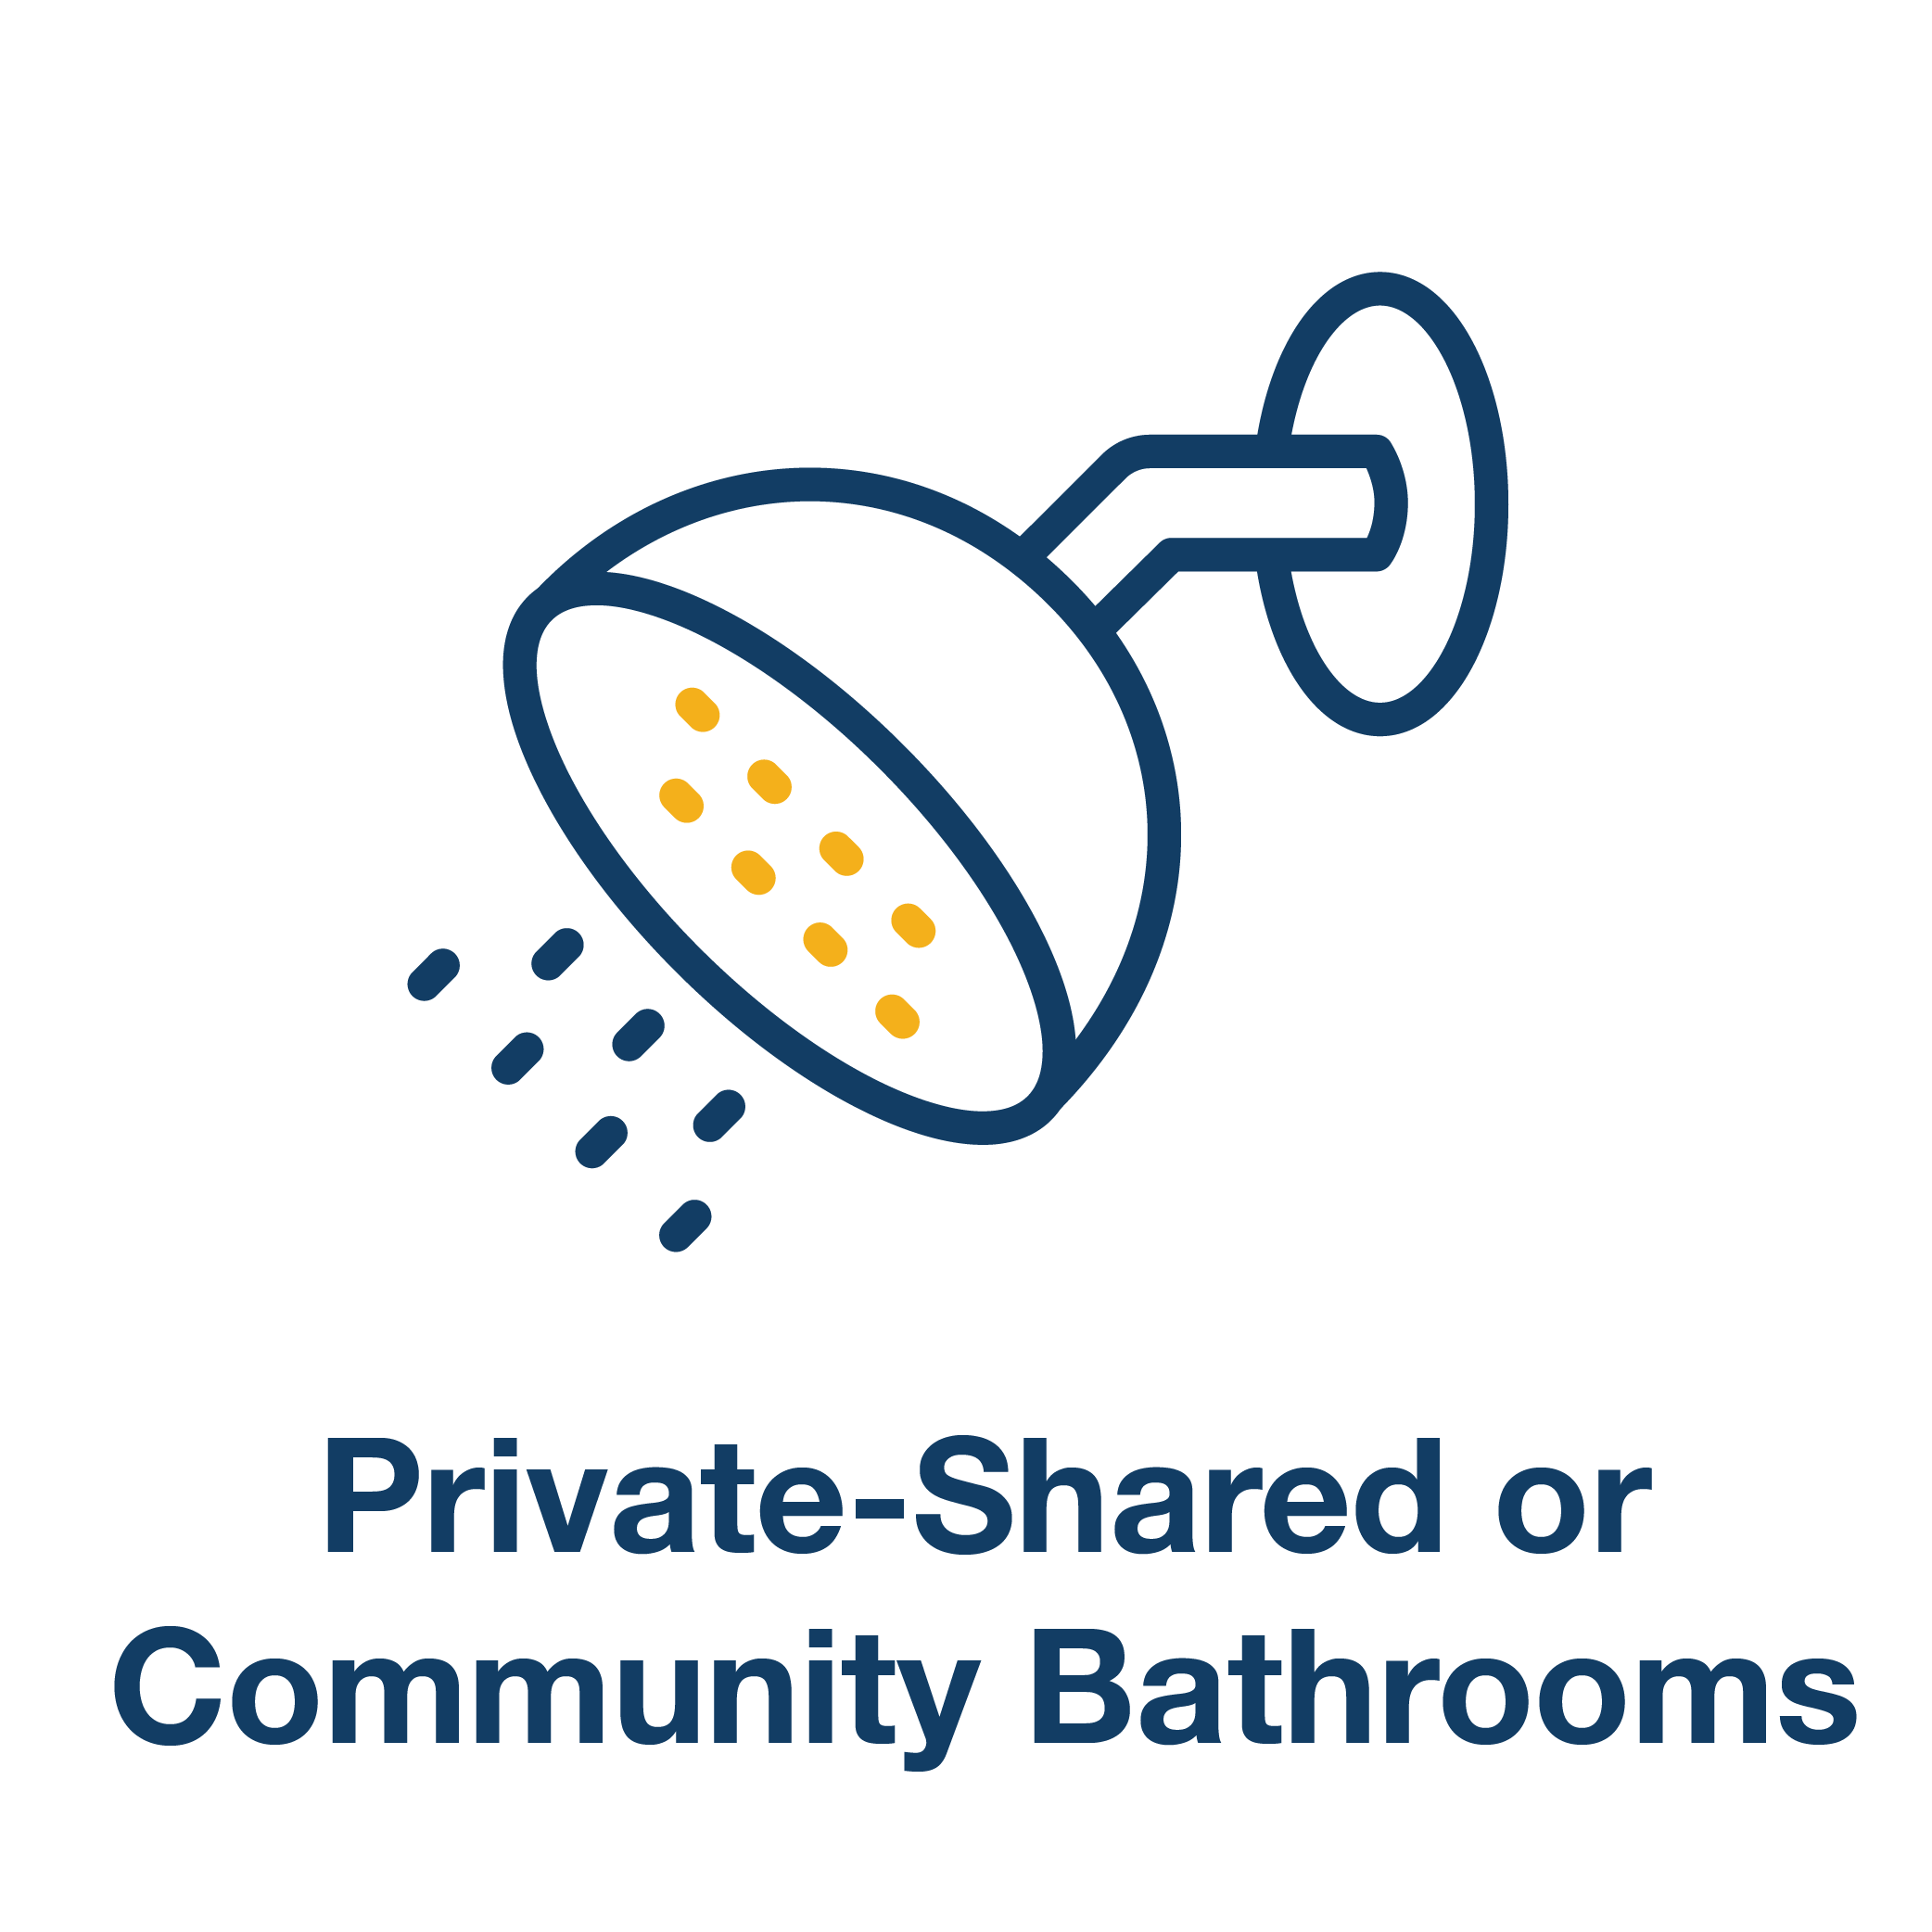 Private-shared or Community Bathrooms